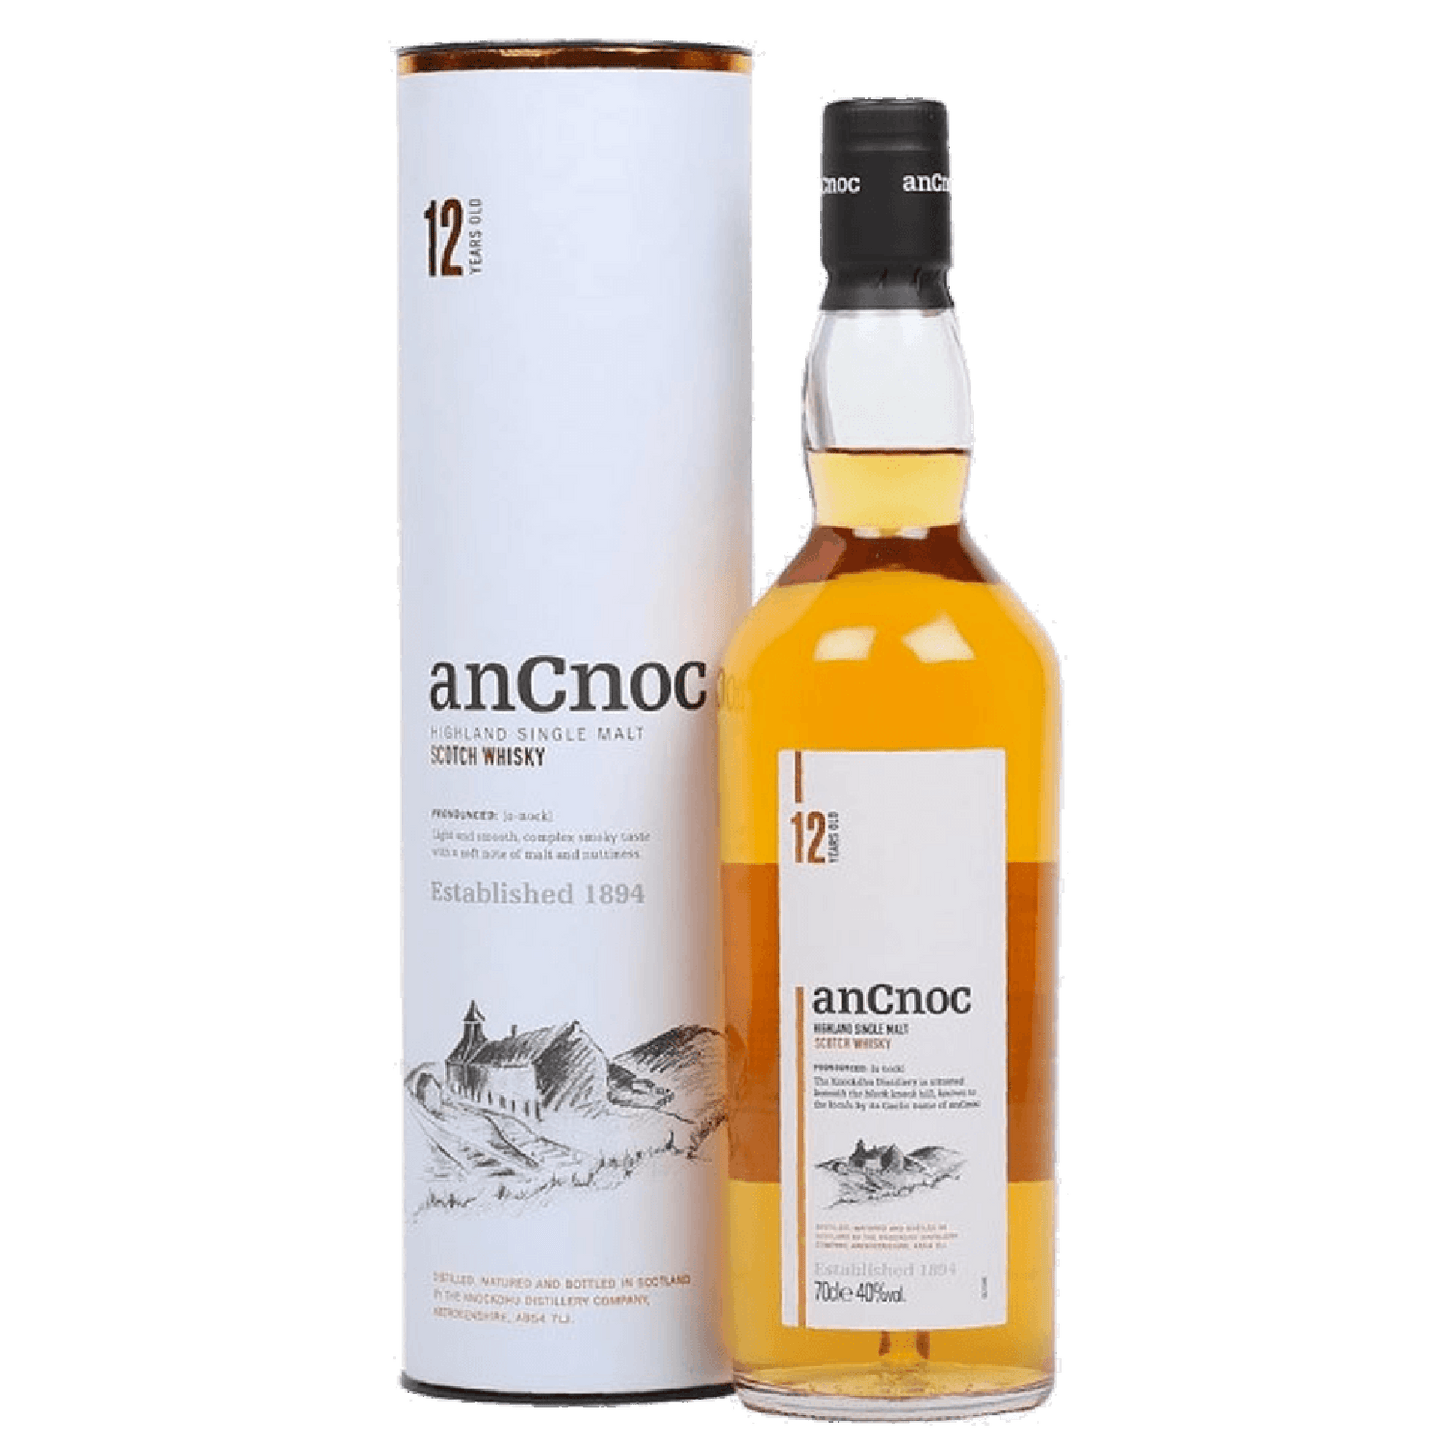 ANCNOC 12 YEAR OLD